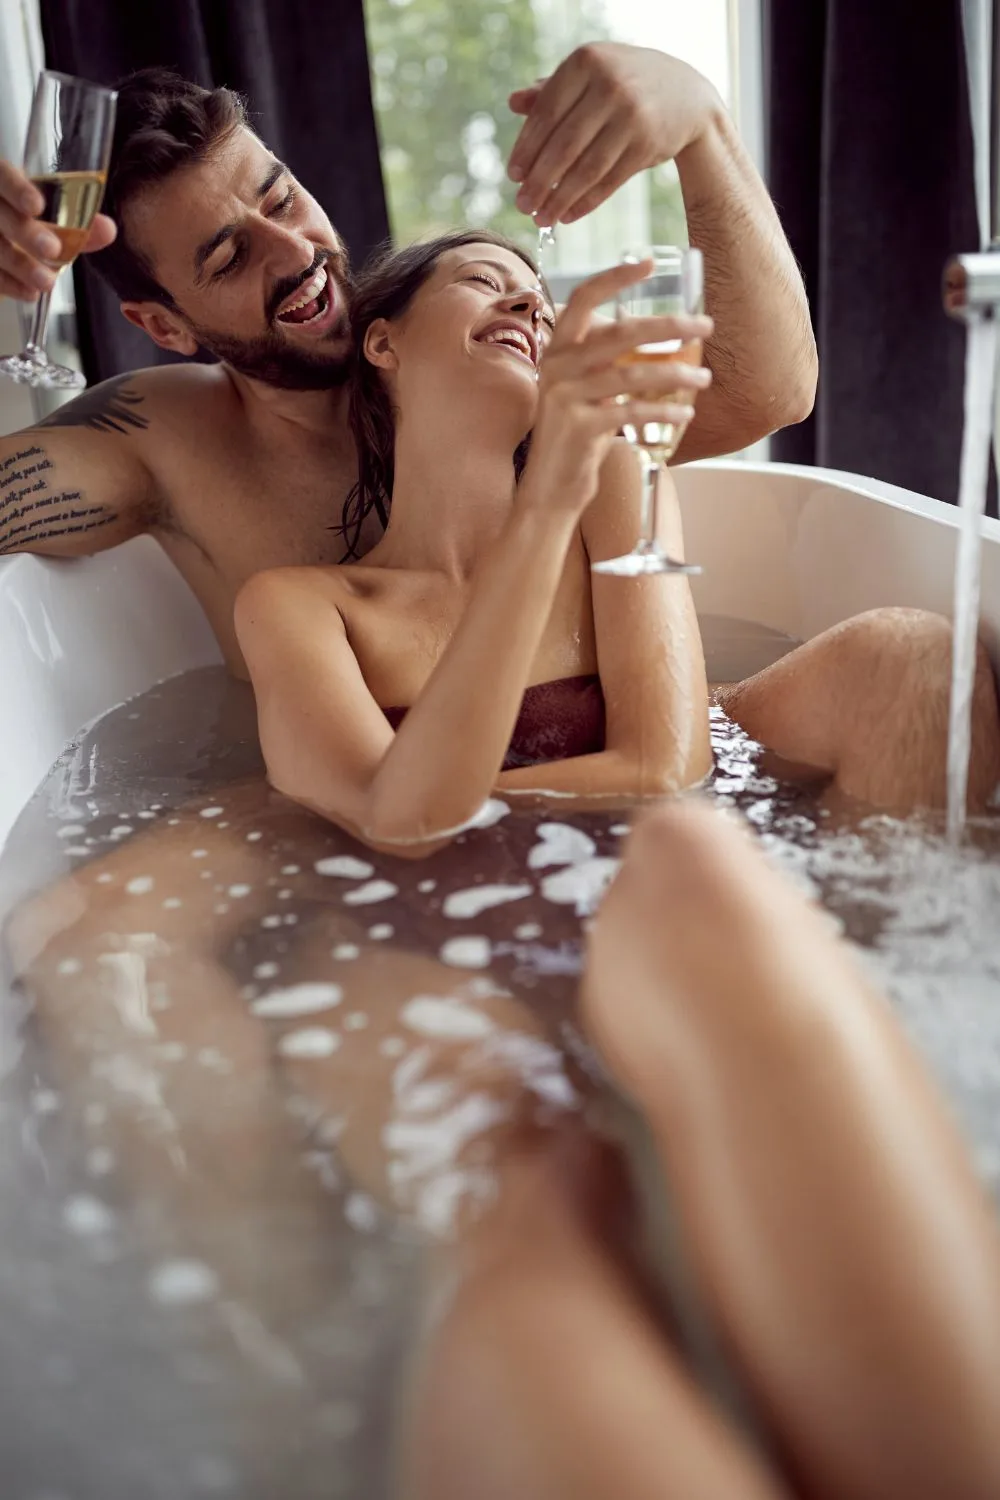 Spice Up Your Love Life with These Crazy Places To Have Sex